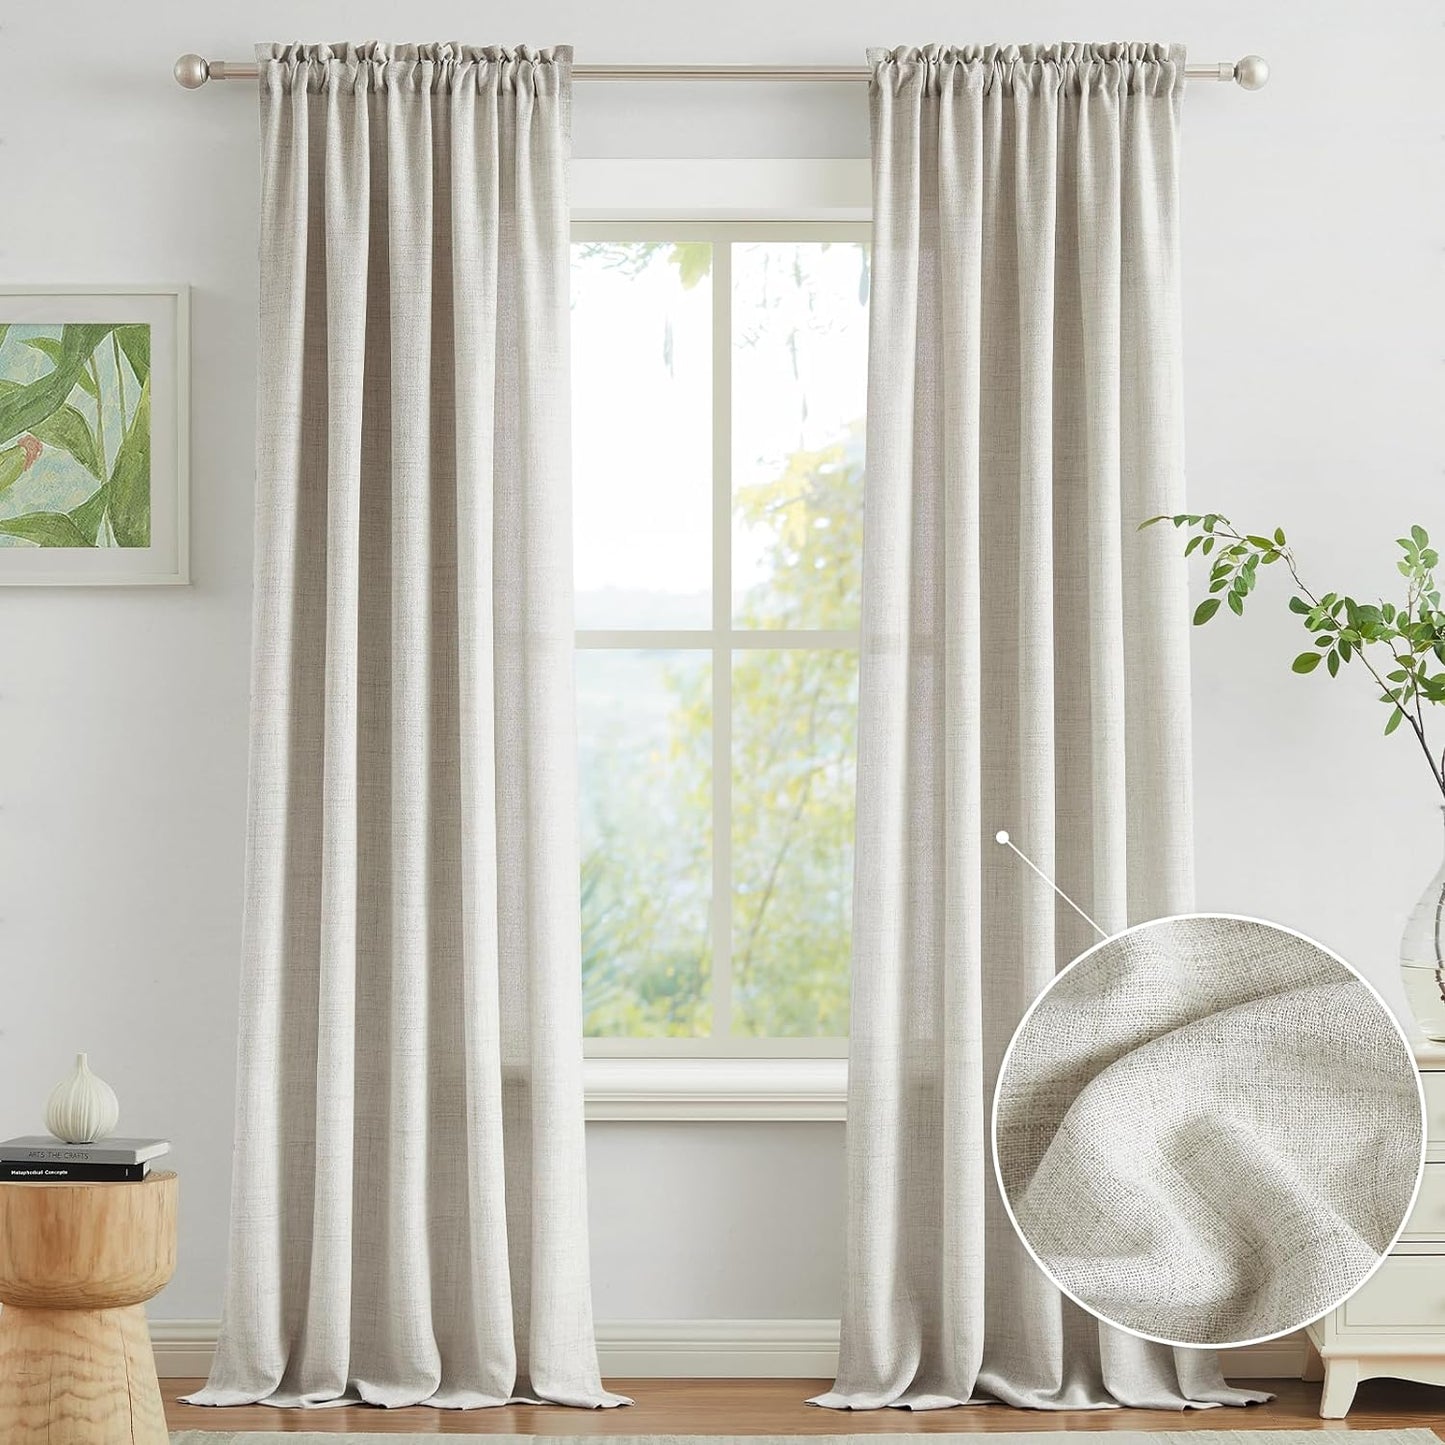 Melodieux Linen Curtains 84 Inches Long for Bedroom - Rod Pocket Burlap Linen Textured Semi Sheer Curtains Light Filtering Privacy Farmhouse Living Room Drapes (Set of 2, 52Inch X 84Inch, Beige)  Melodieux Natural W52" X L108" 